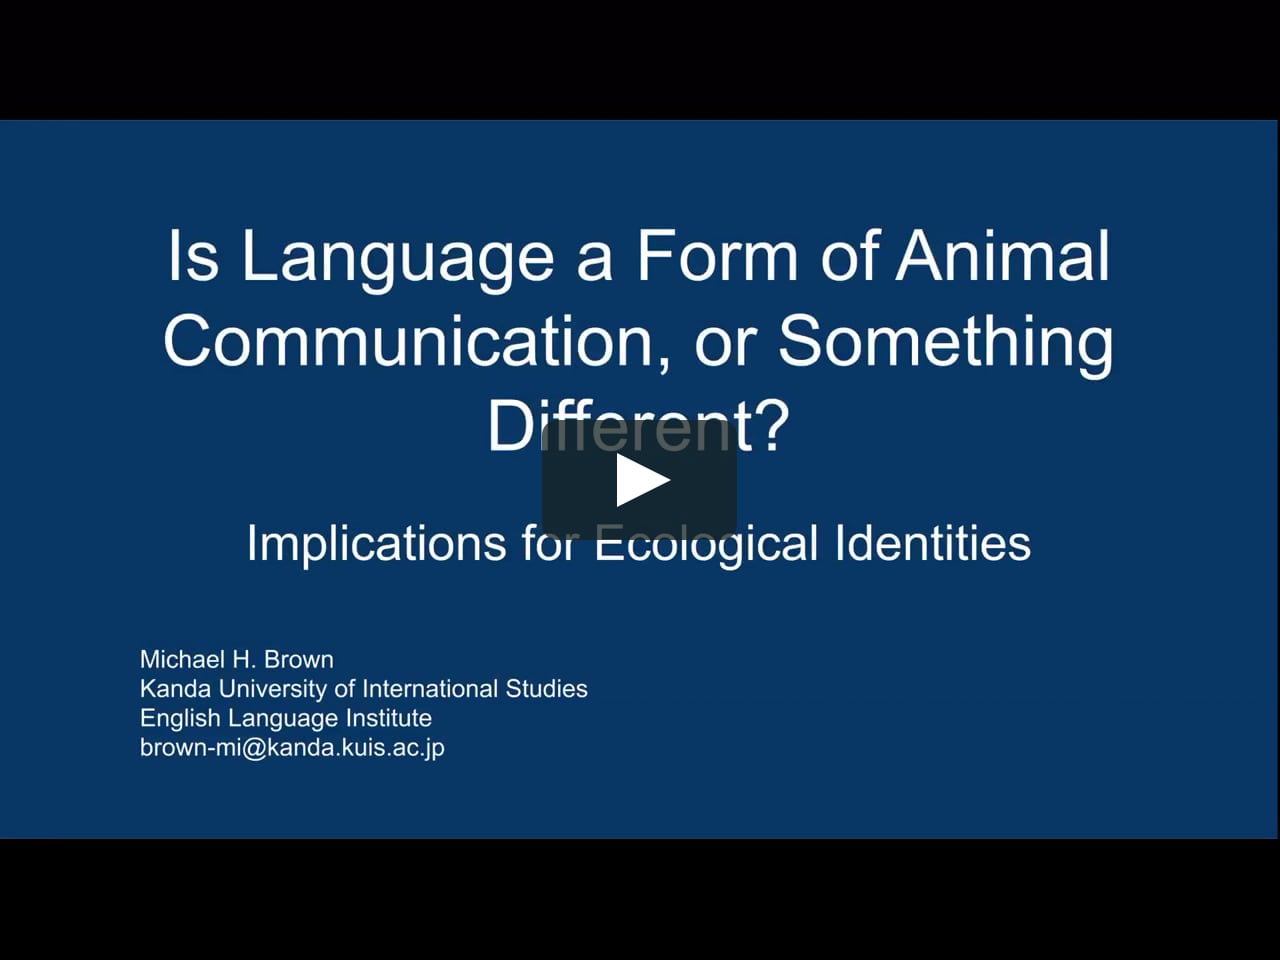 Is Language a Form of Animal Communication, or Something Different?  Implications for Ecological Identities on Vimeo